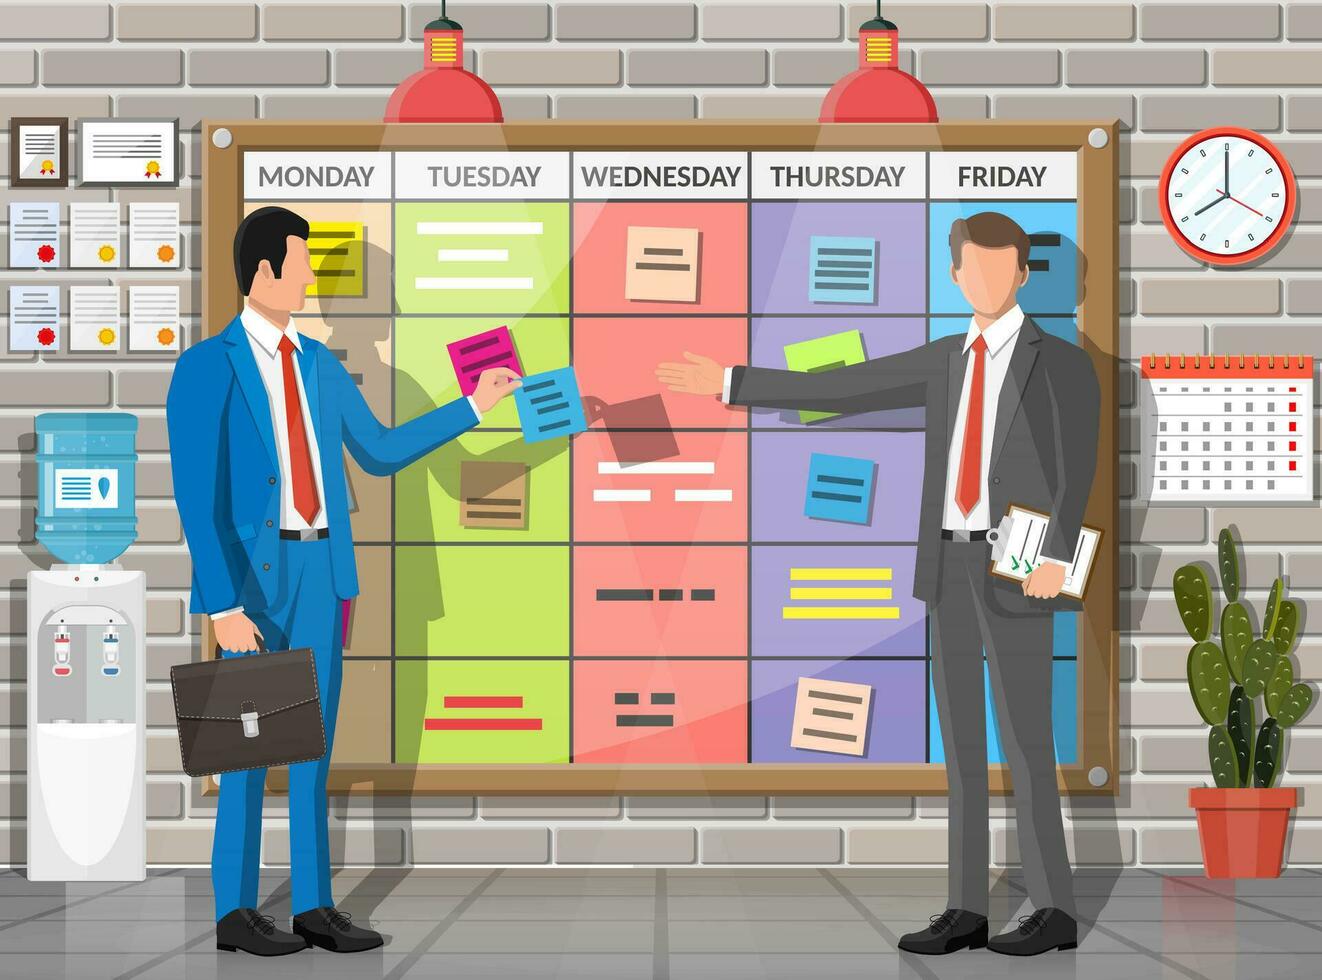 People, scrum board in office interior. Bulletin board hanging on wall full of tasks on sticky note cards. List of event for employee. Development team work agenda to do list. Flat vector illustration